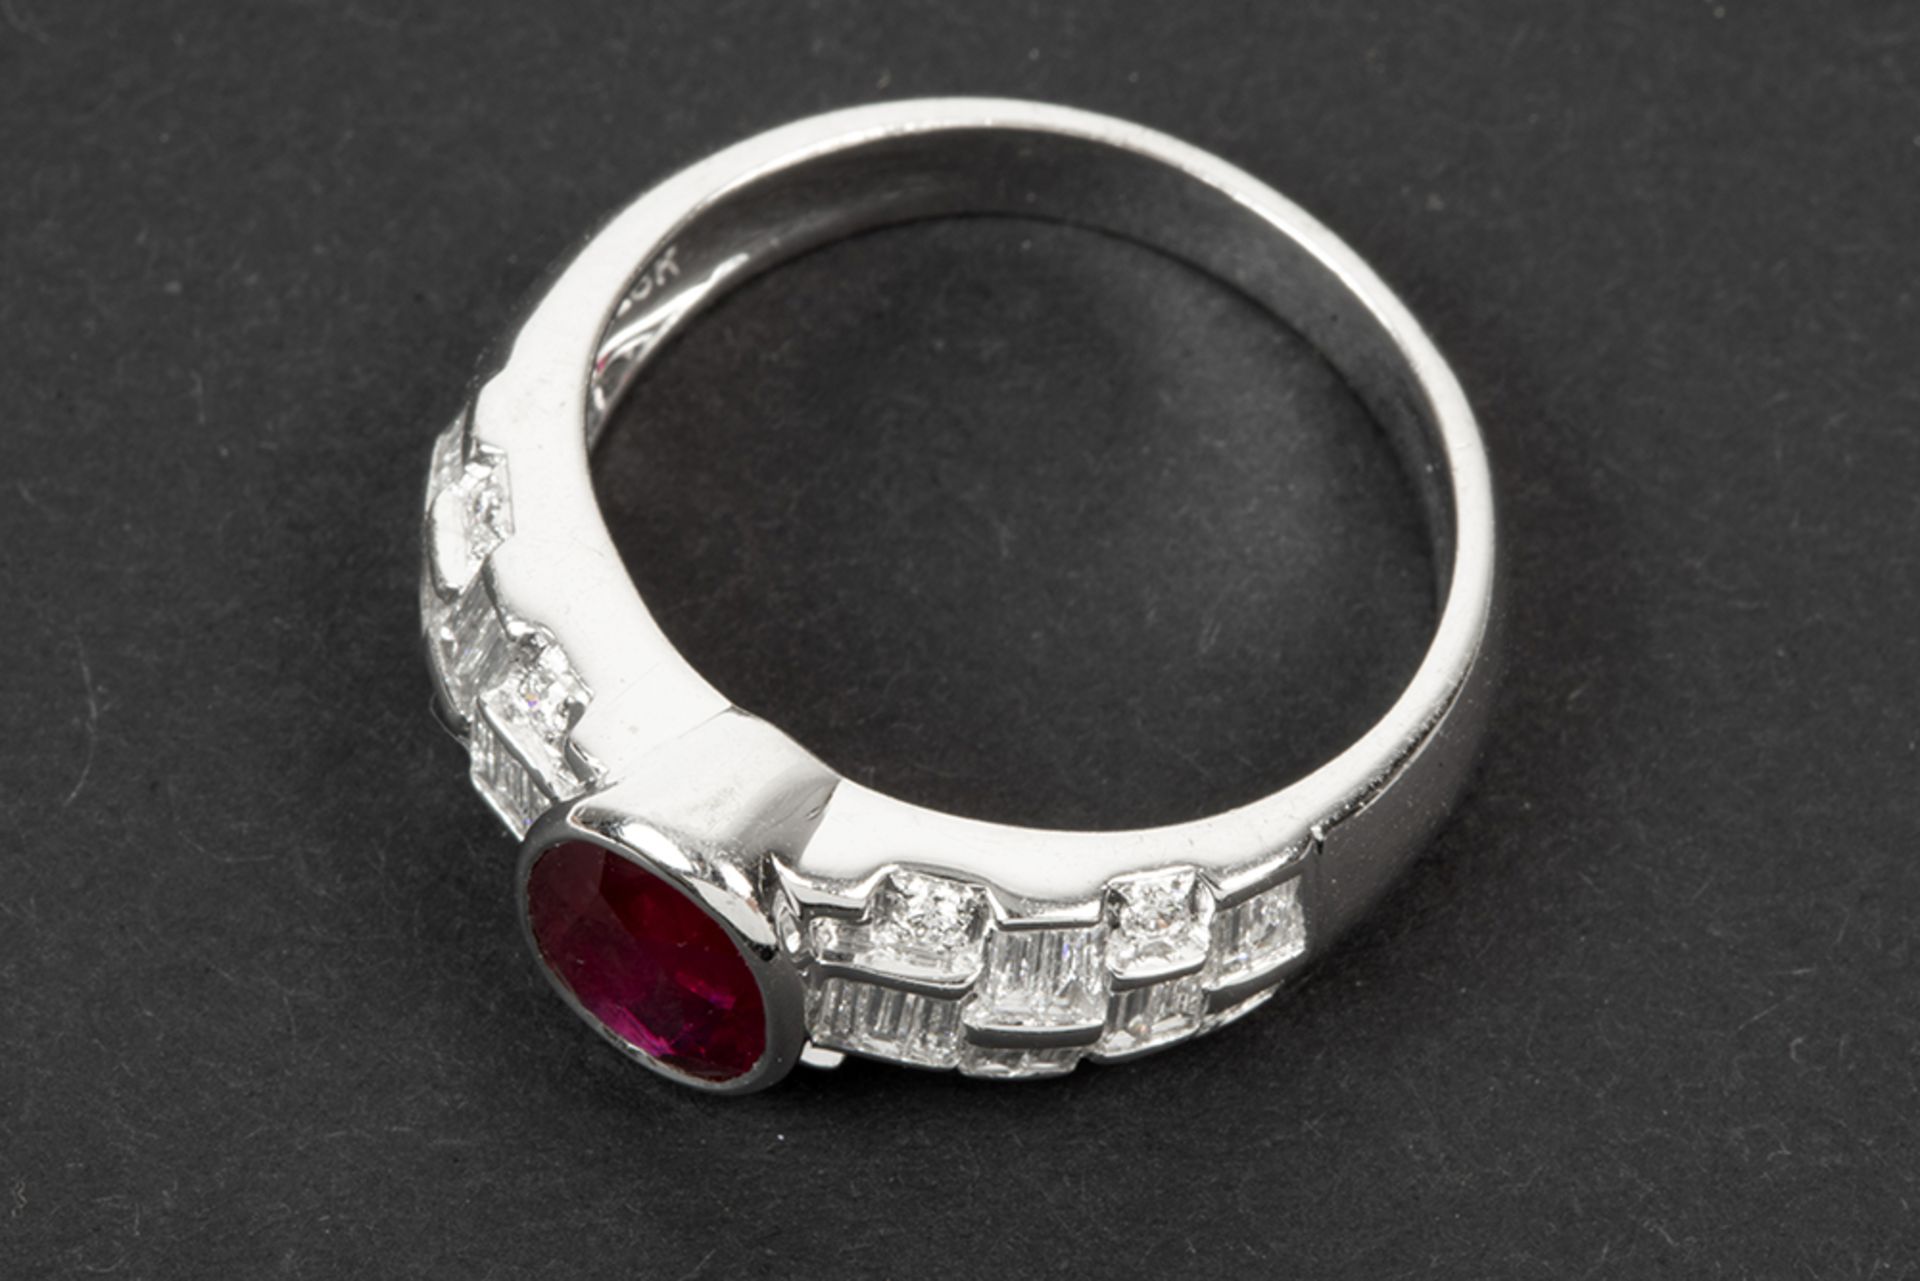 a 1,71 carat not heated Burmese ruby set in a ring in white gold (18 carat) with ca 0,65 carat of - Image 2 of 3